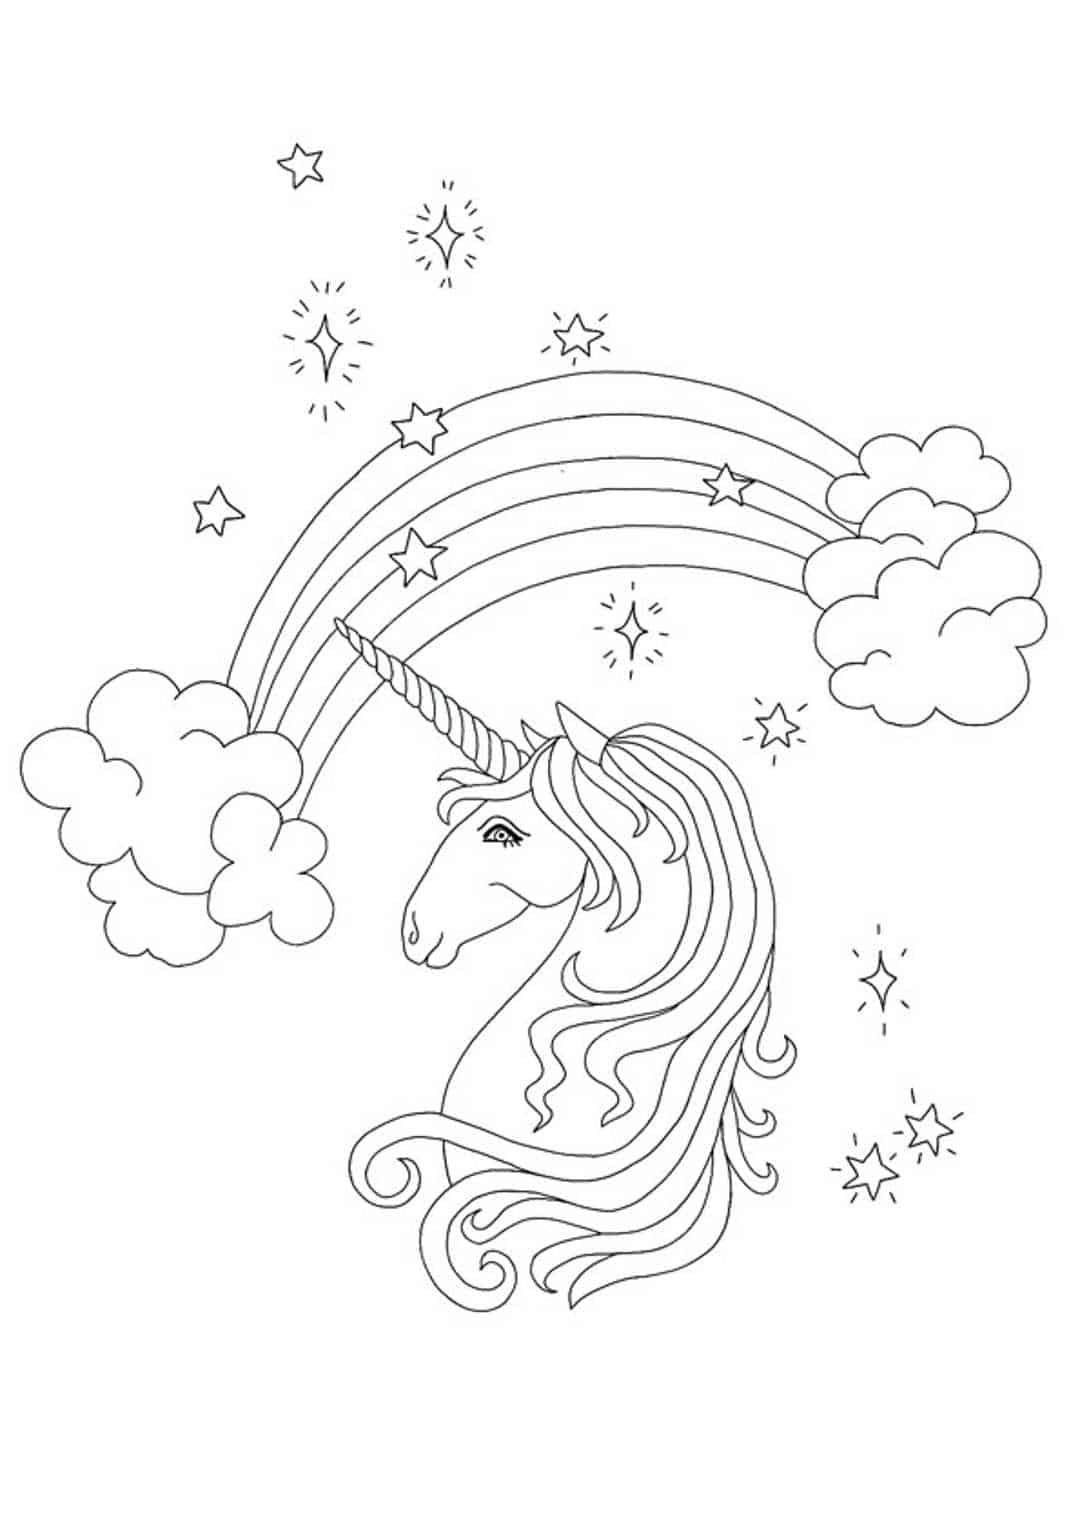 Unicorn head coloring pages